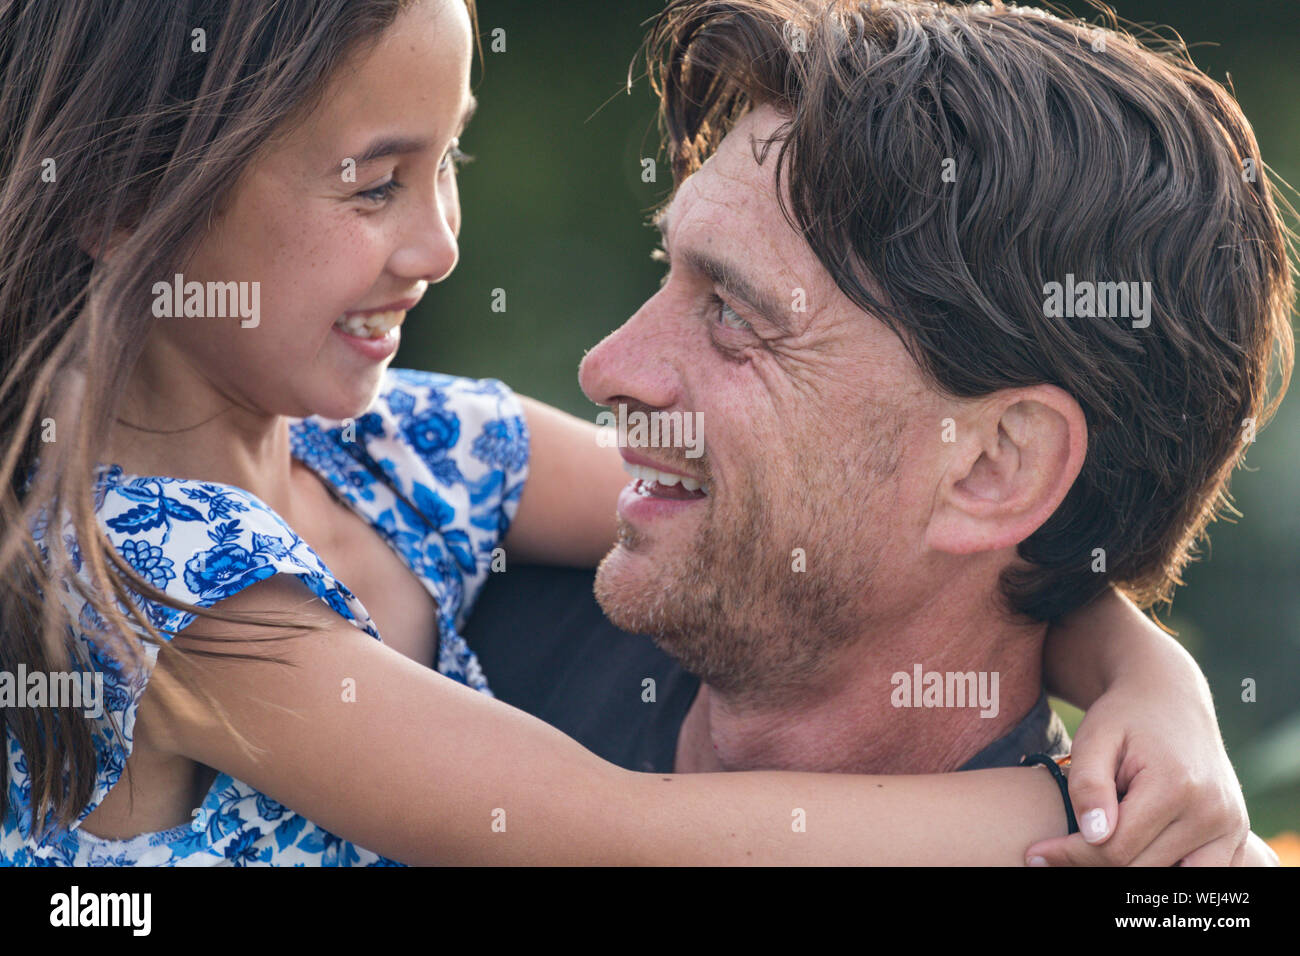 Caucasian father holding mixed ethnic Asian 9-year old daughter, both happy, San Jose, California Stock Photo